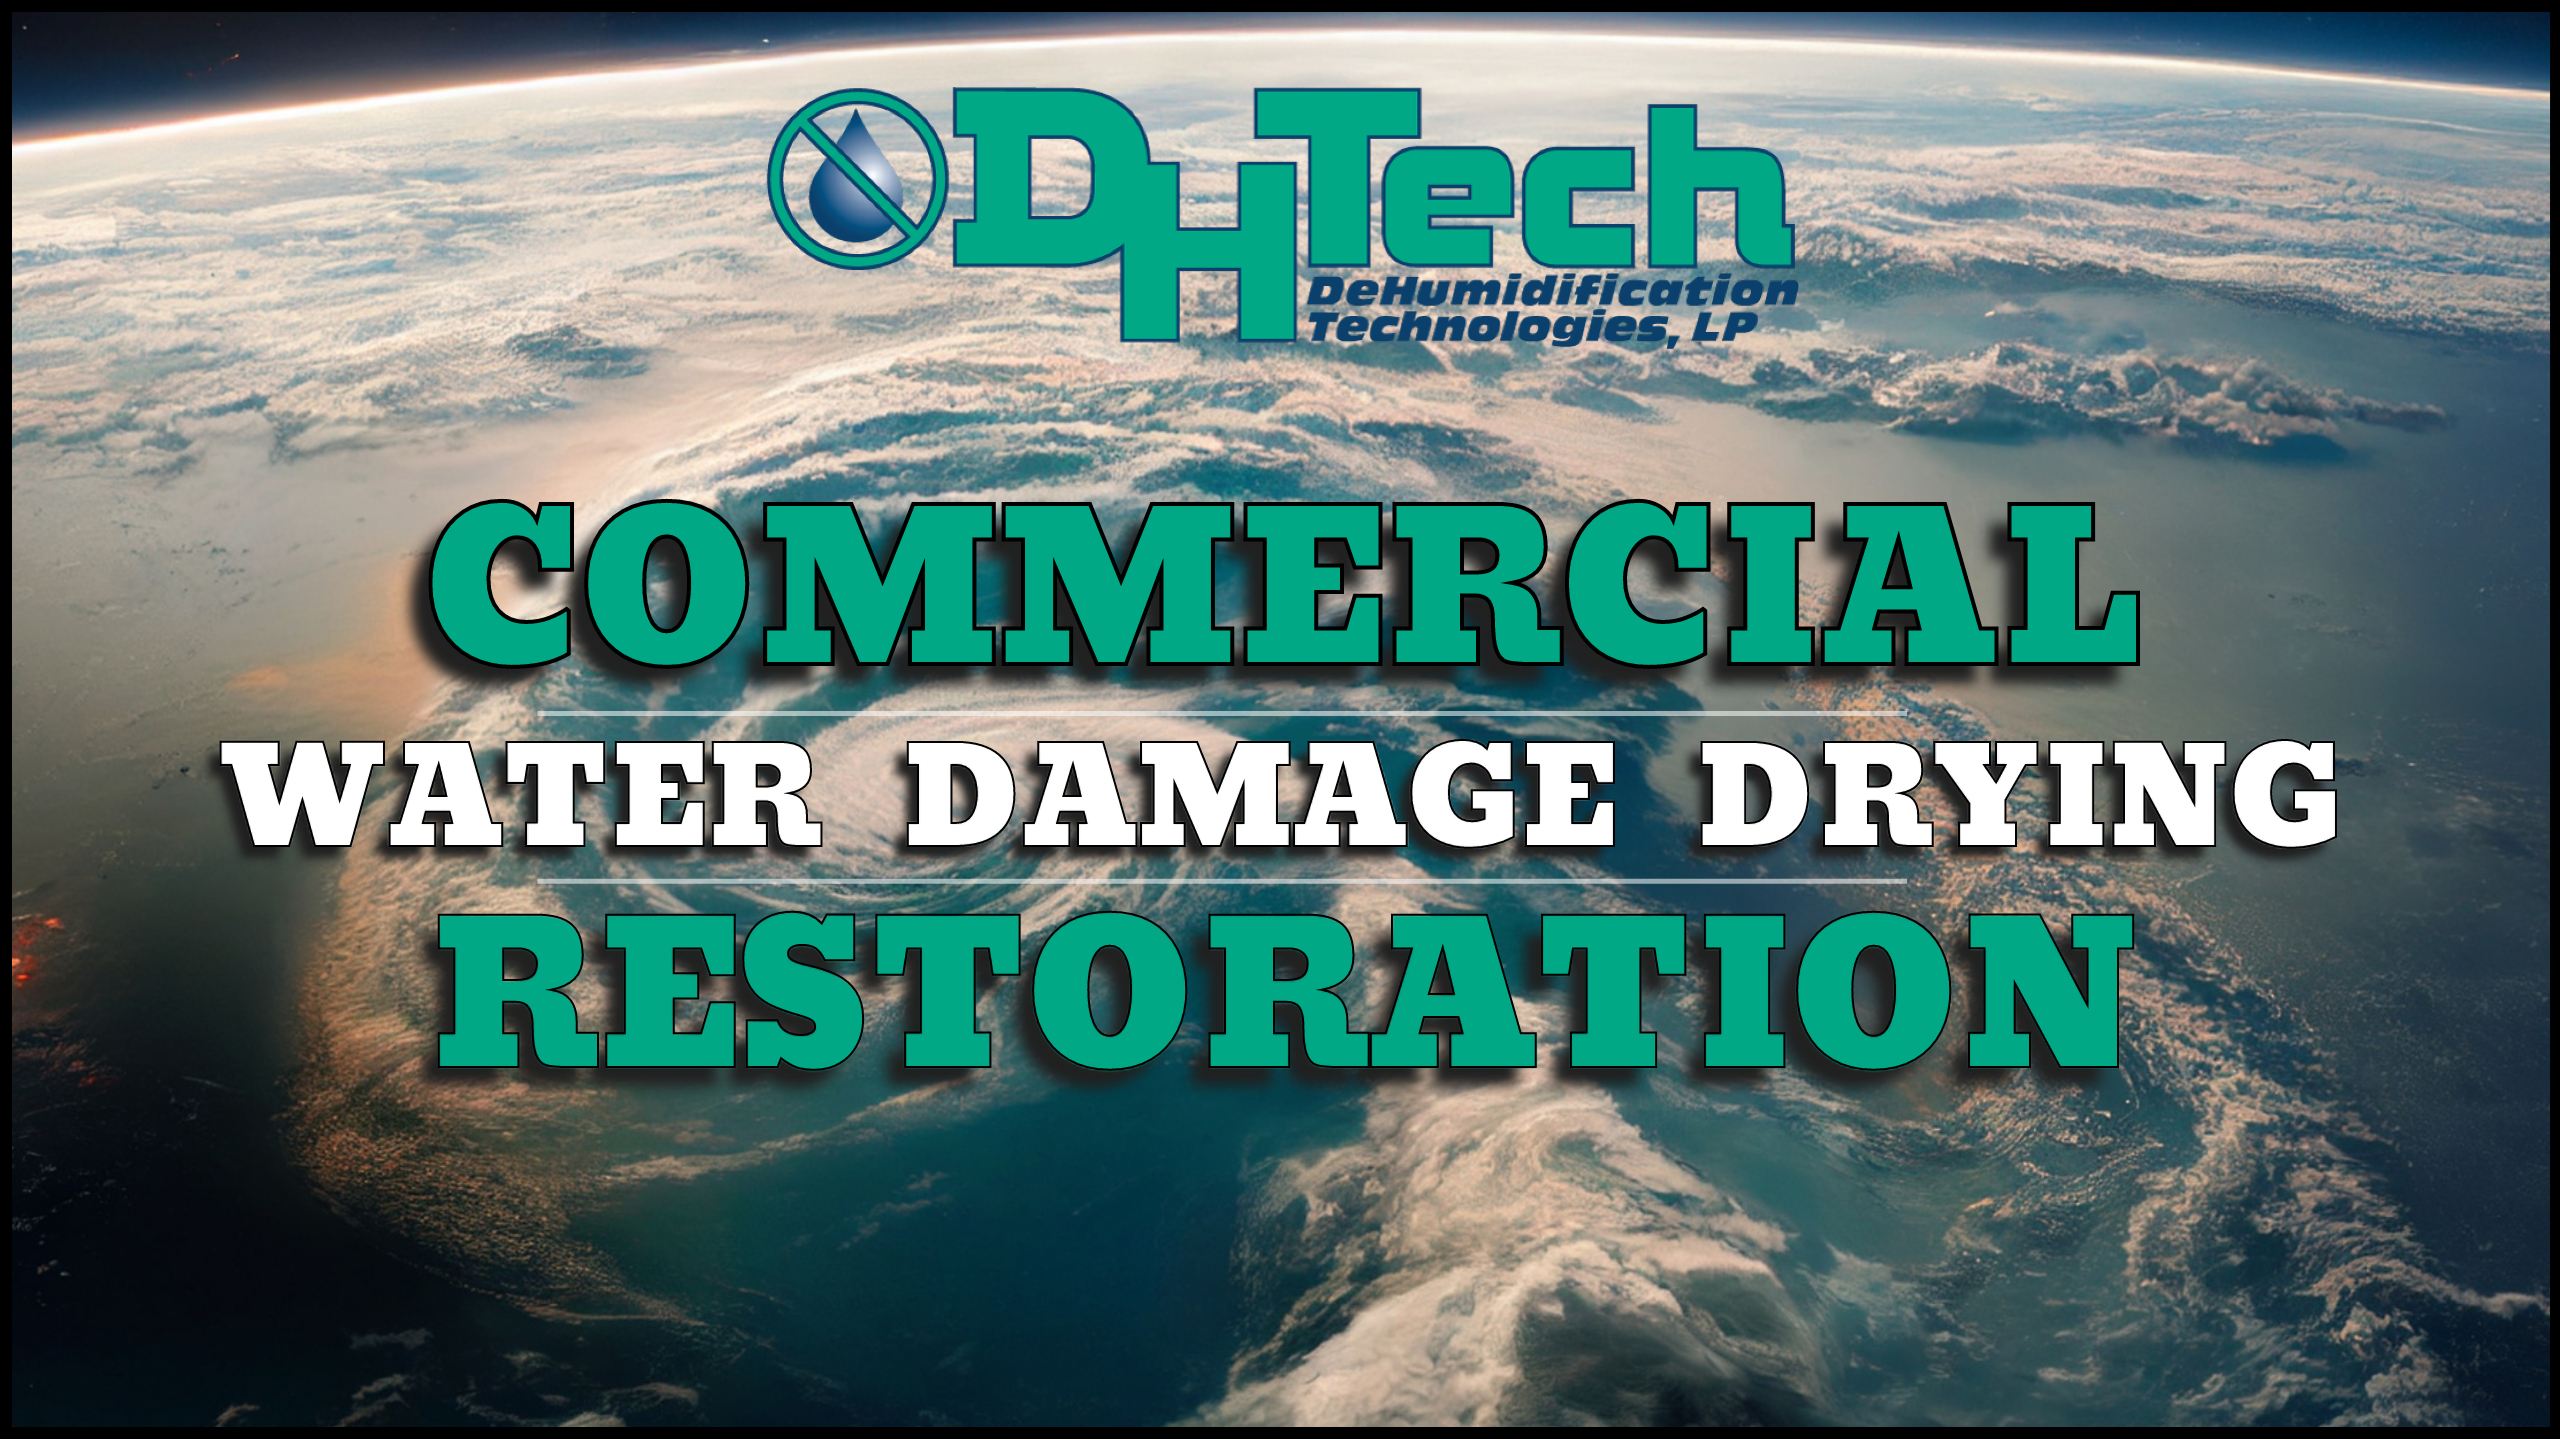 Inhibit Mold and Mildew Growth Preserve Unaffected Areas Minimize business interruption Reduced restoration costs